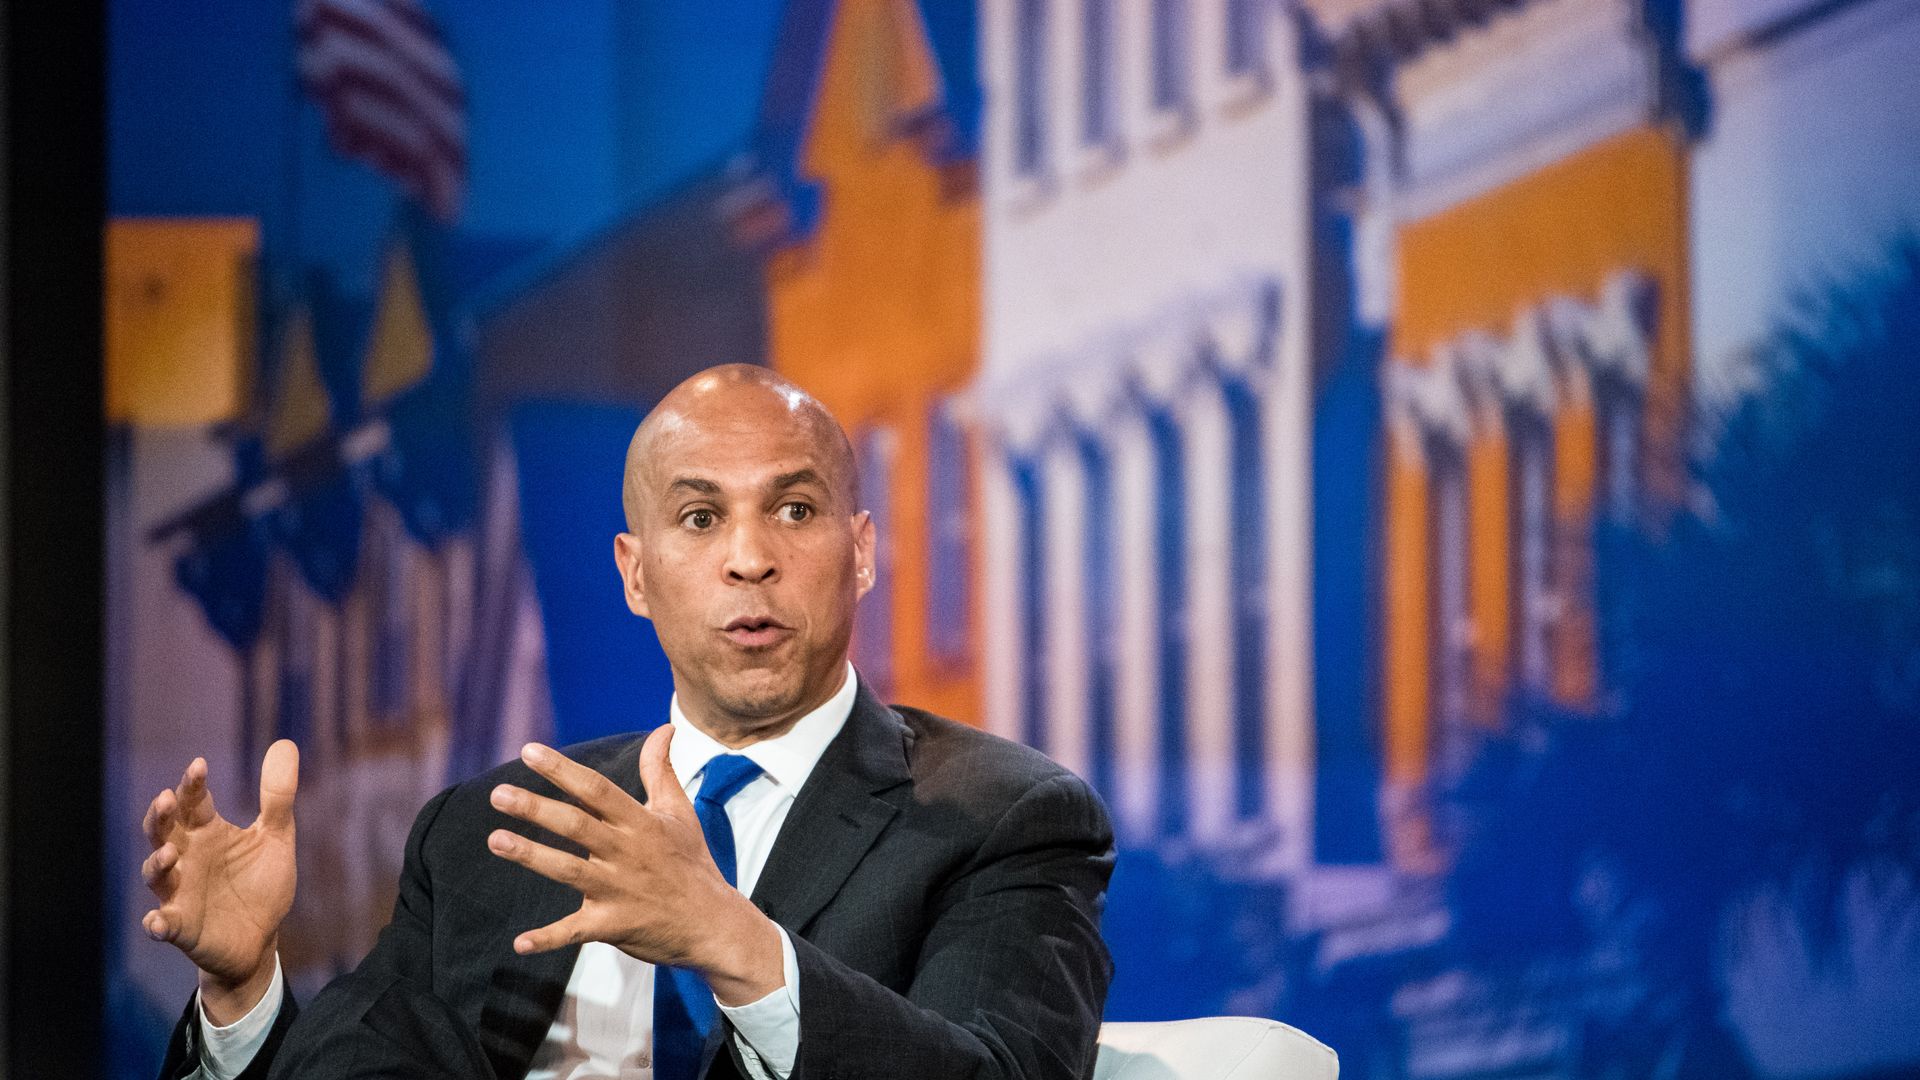 In this image, Booker sits while speaking.